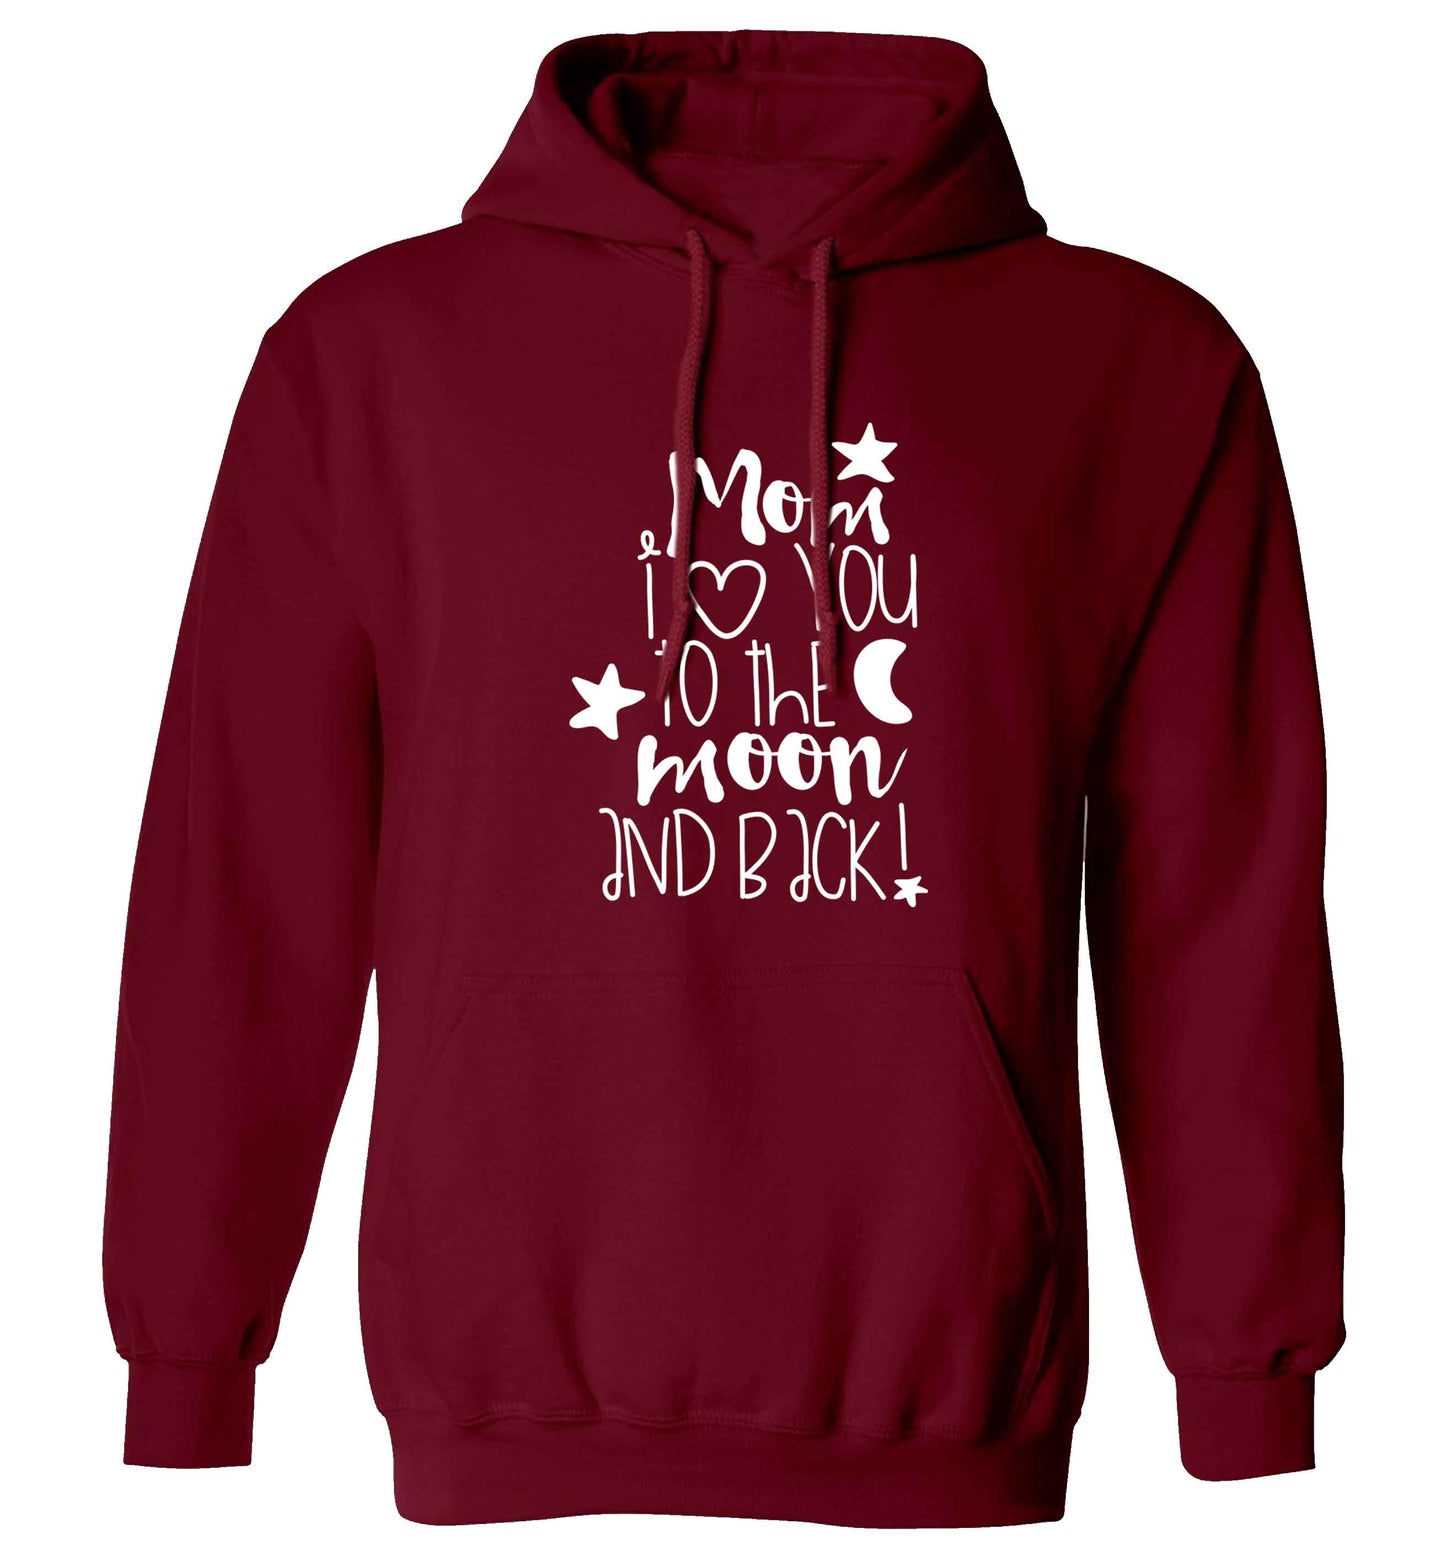 Mom I love you to the moon and back adults unisex maroon hoodie 2XL